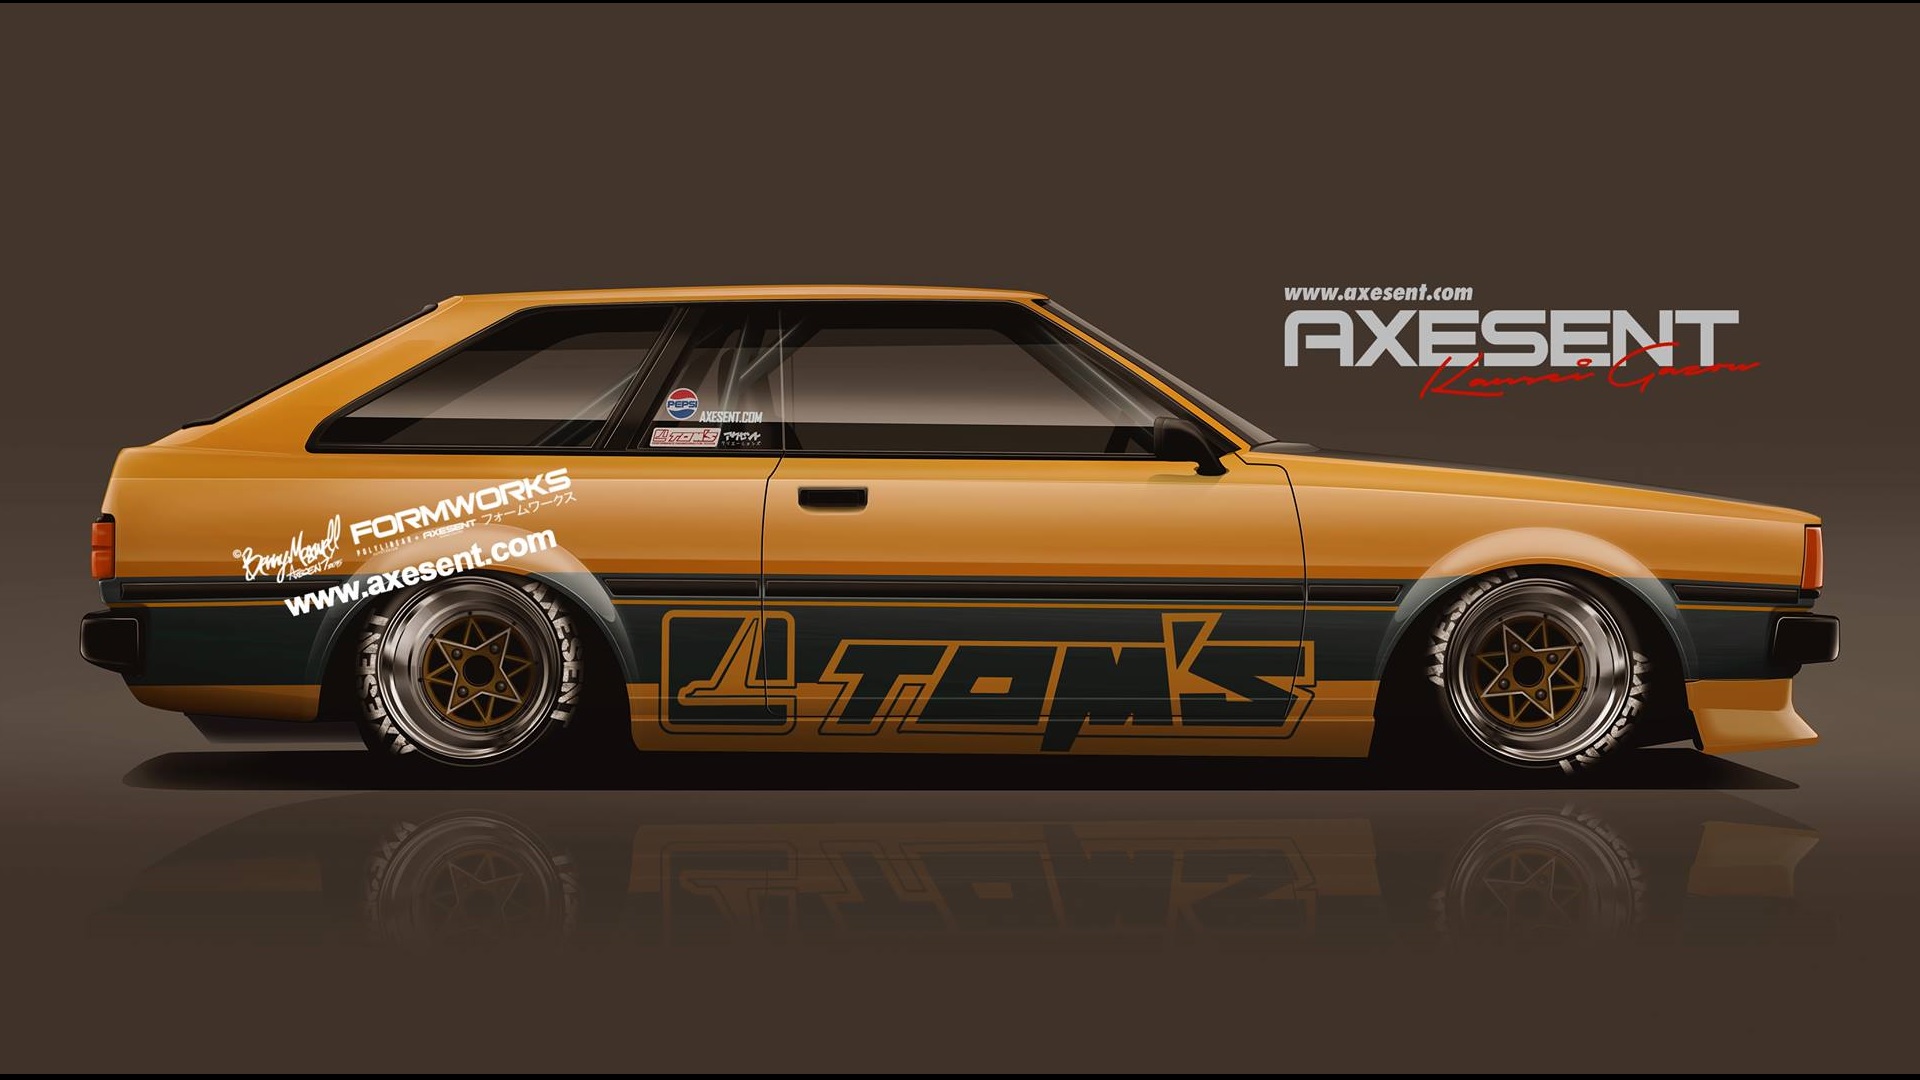 Axesent Creations Toyota Corolla Render JDM Toyota Japanese Cars Side View Yellow Cars Digital Art 1920x1080